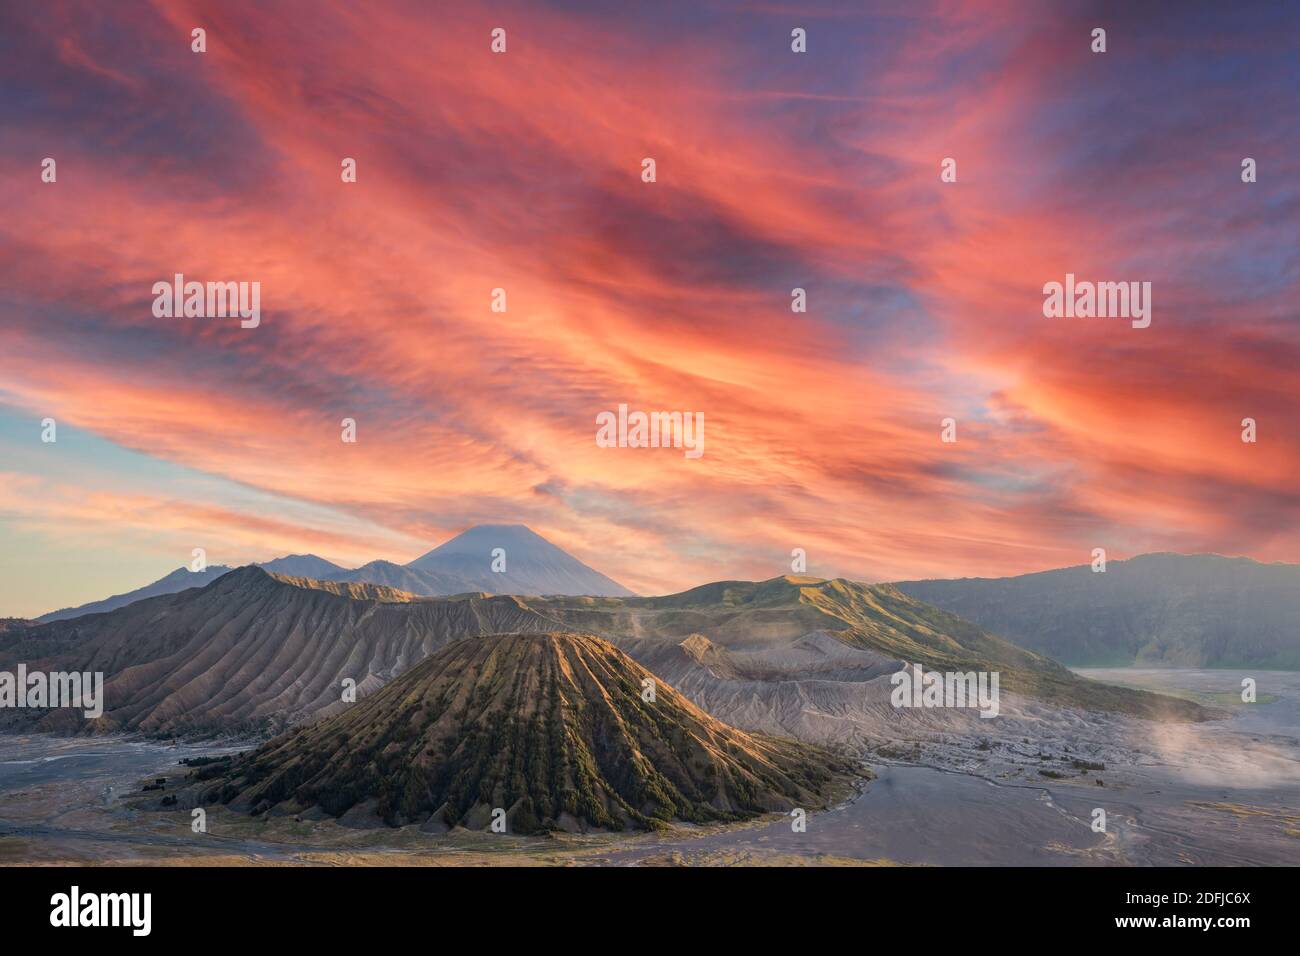 View from above, stunning aerial view of the Mt. Bromo and Mt Batok in the foreground and Mt Semeru in the distance during a dramatic sunset. Stock Photo